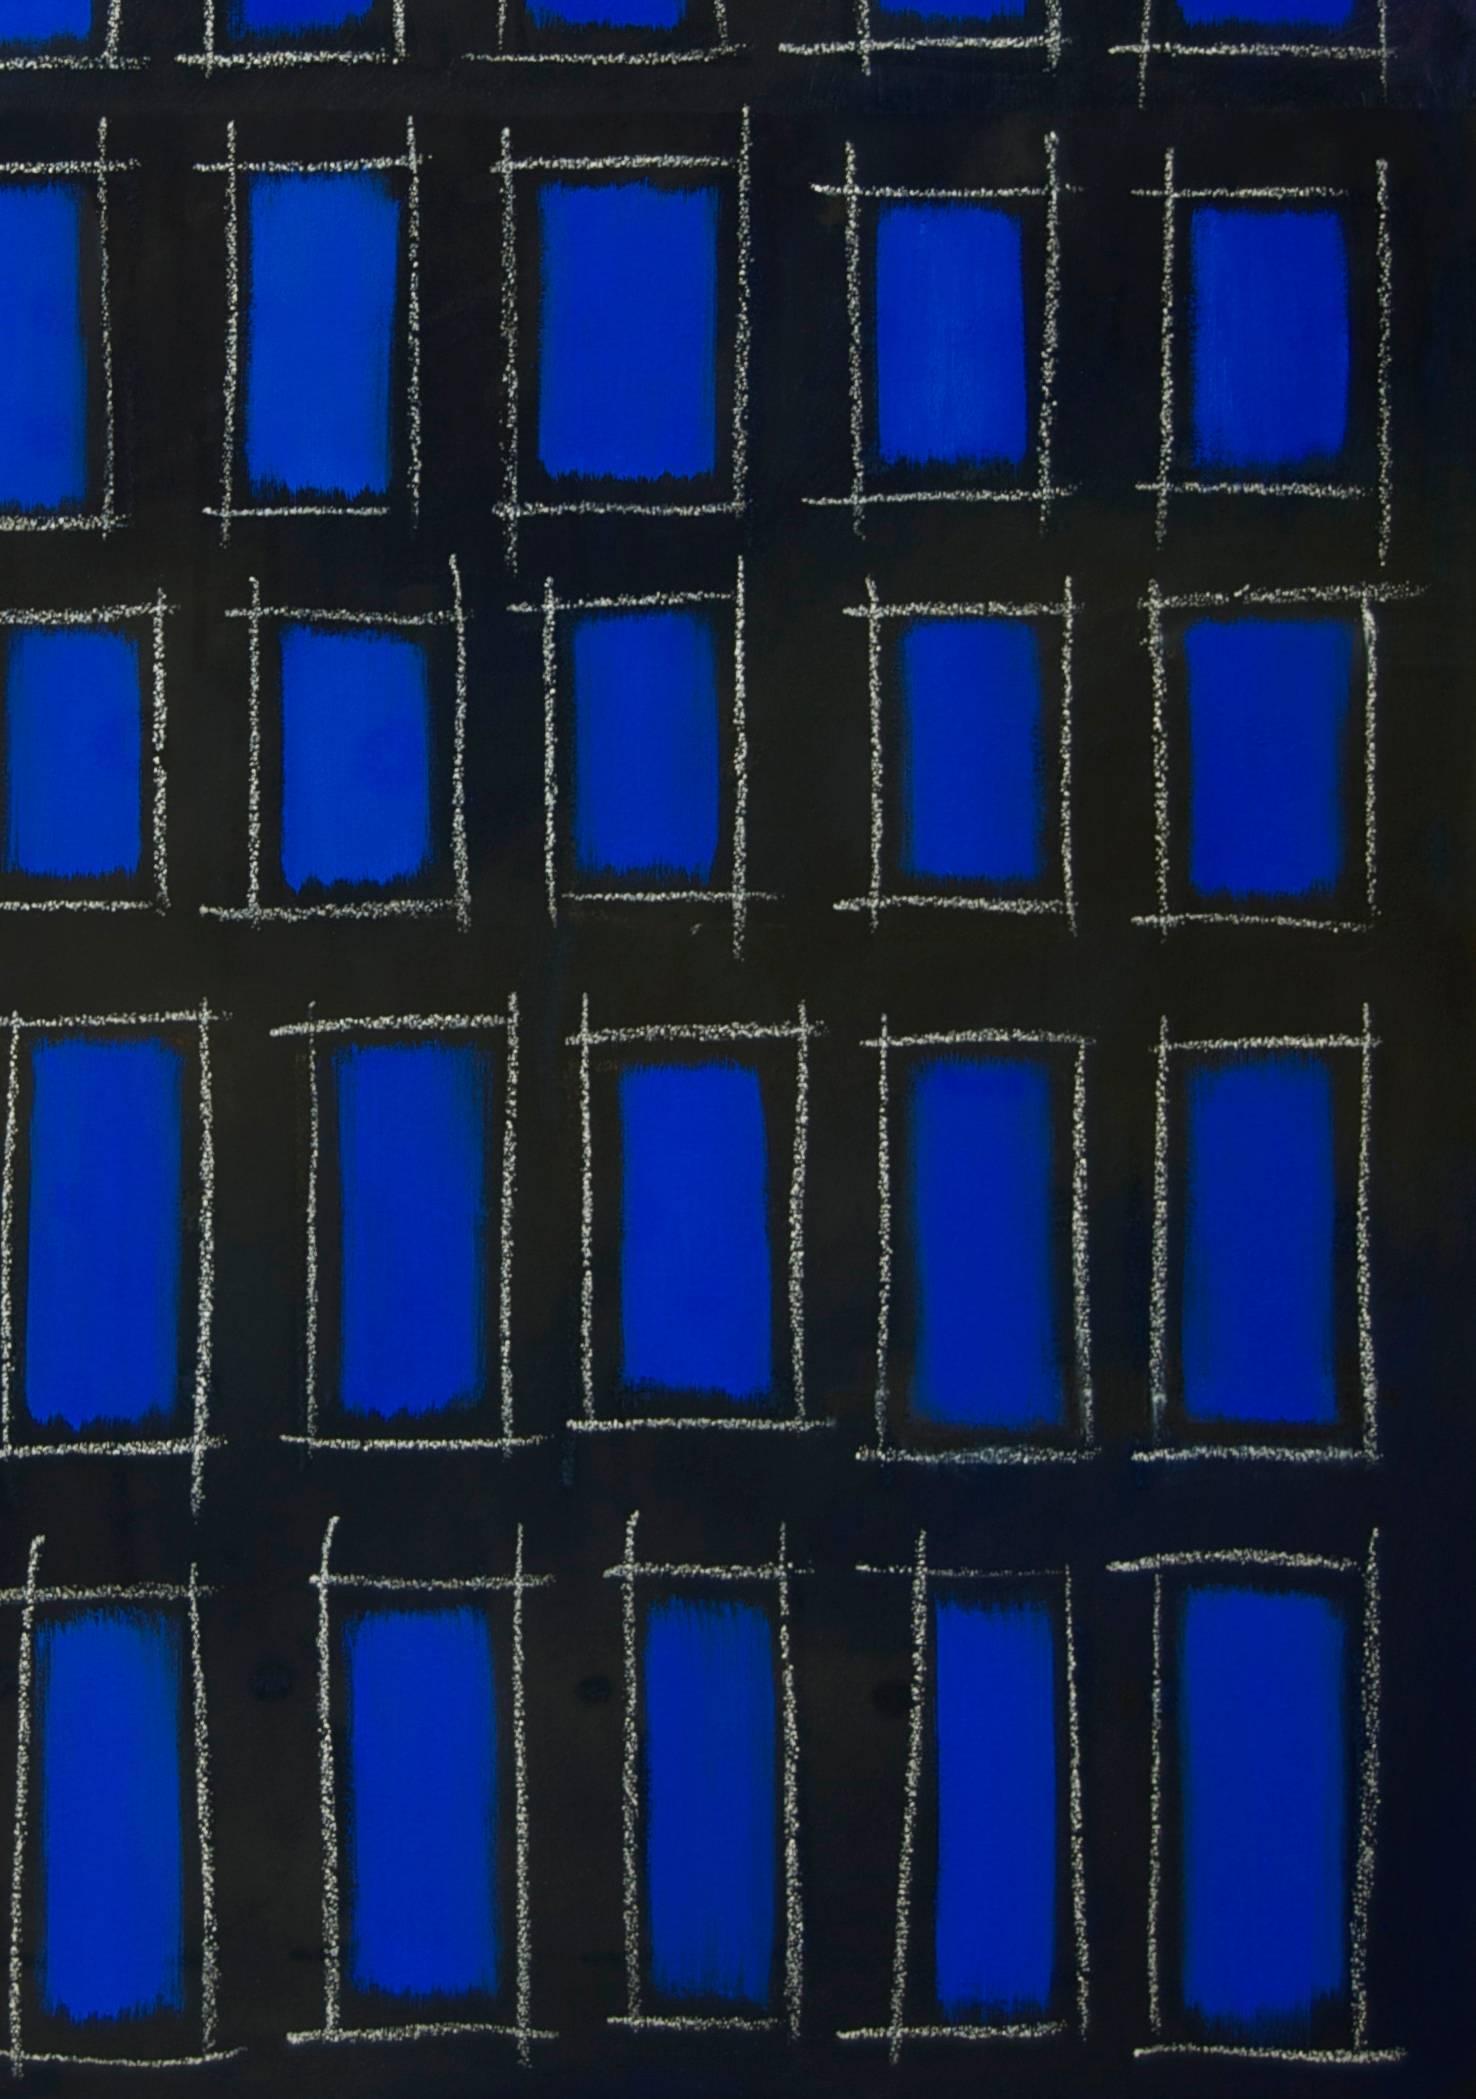 This exceptional abstract painting by highly collected artist Tina Bluefield (b. 1945) is particularly striking because of the deep blue that surfaces from behind a grid of black and gray. It is painted in the artist's signature medium of oil paint